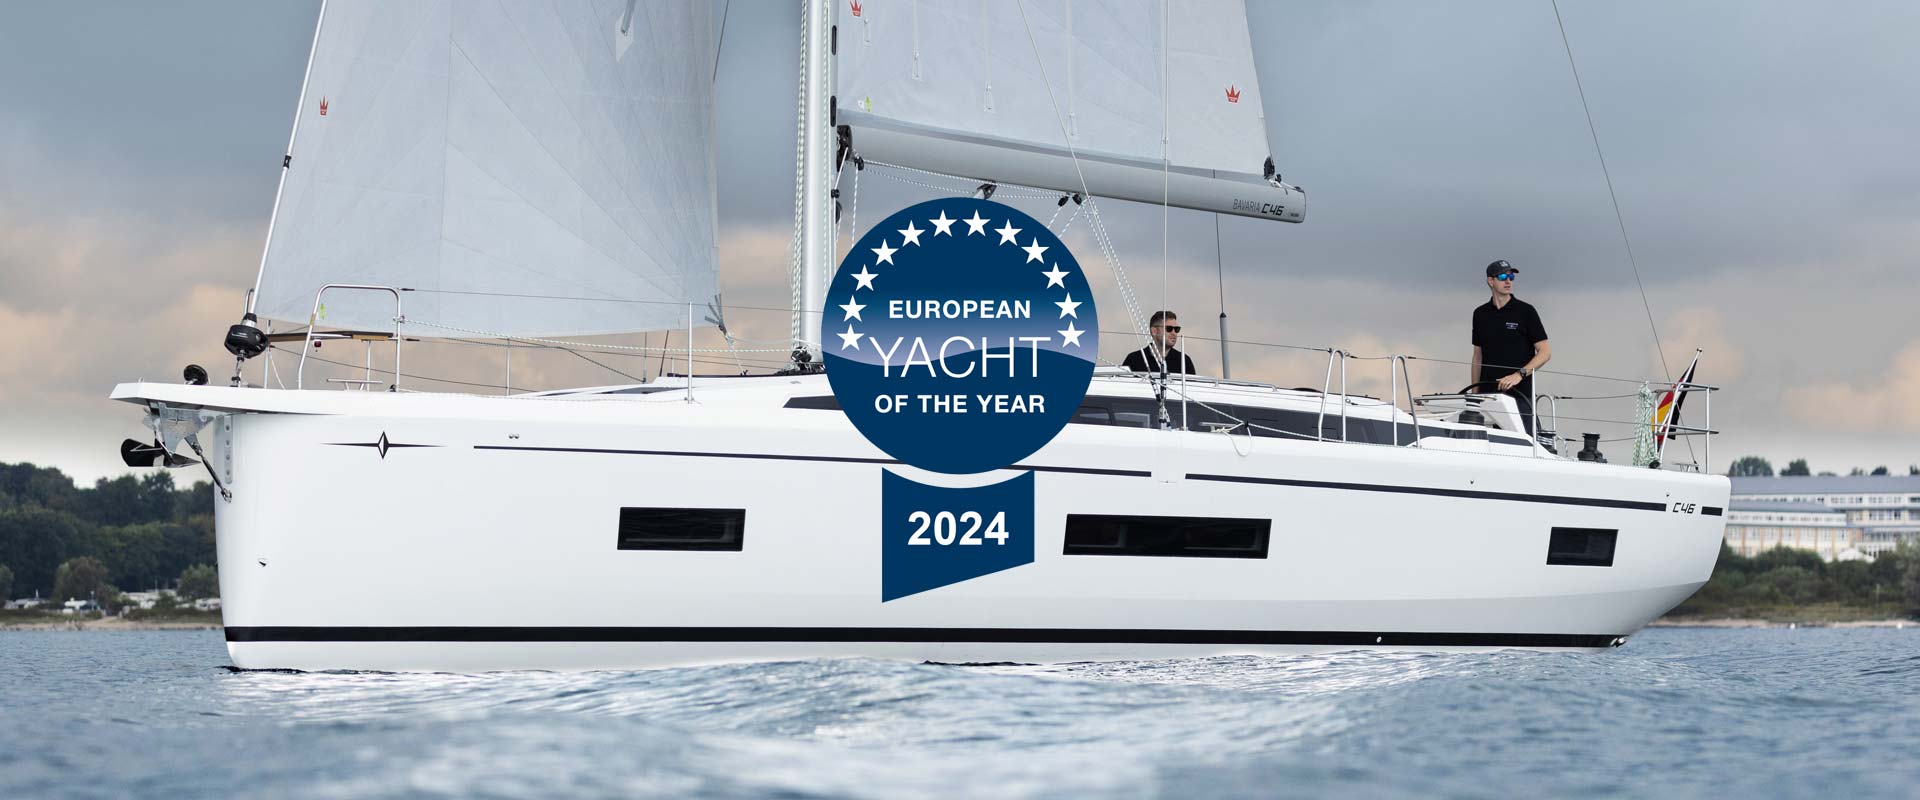 The brand new BAVARIA C46 - a sailing dream on the water